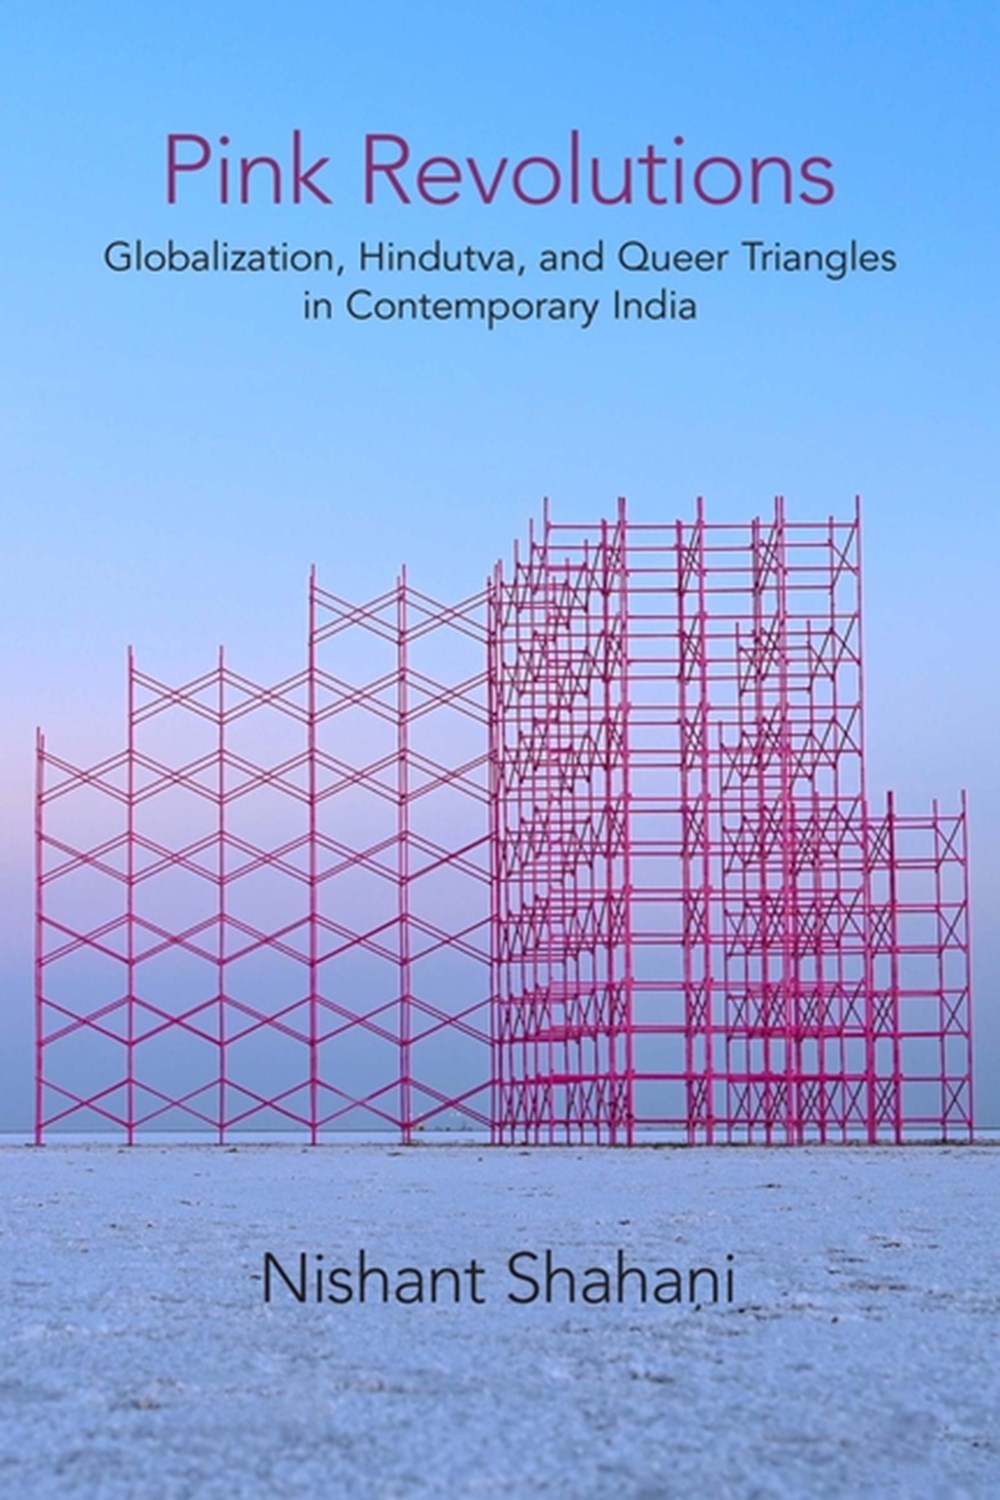 Pink Revolutions: Globalization, Hindutva, and Queer Triangles in Contemporary India